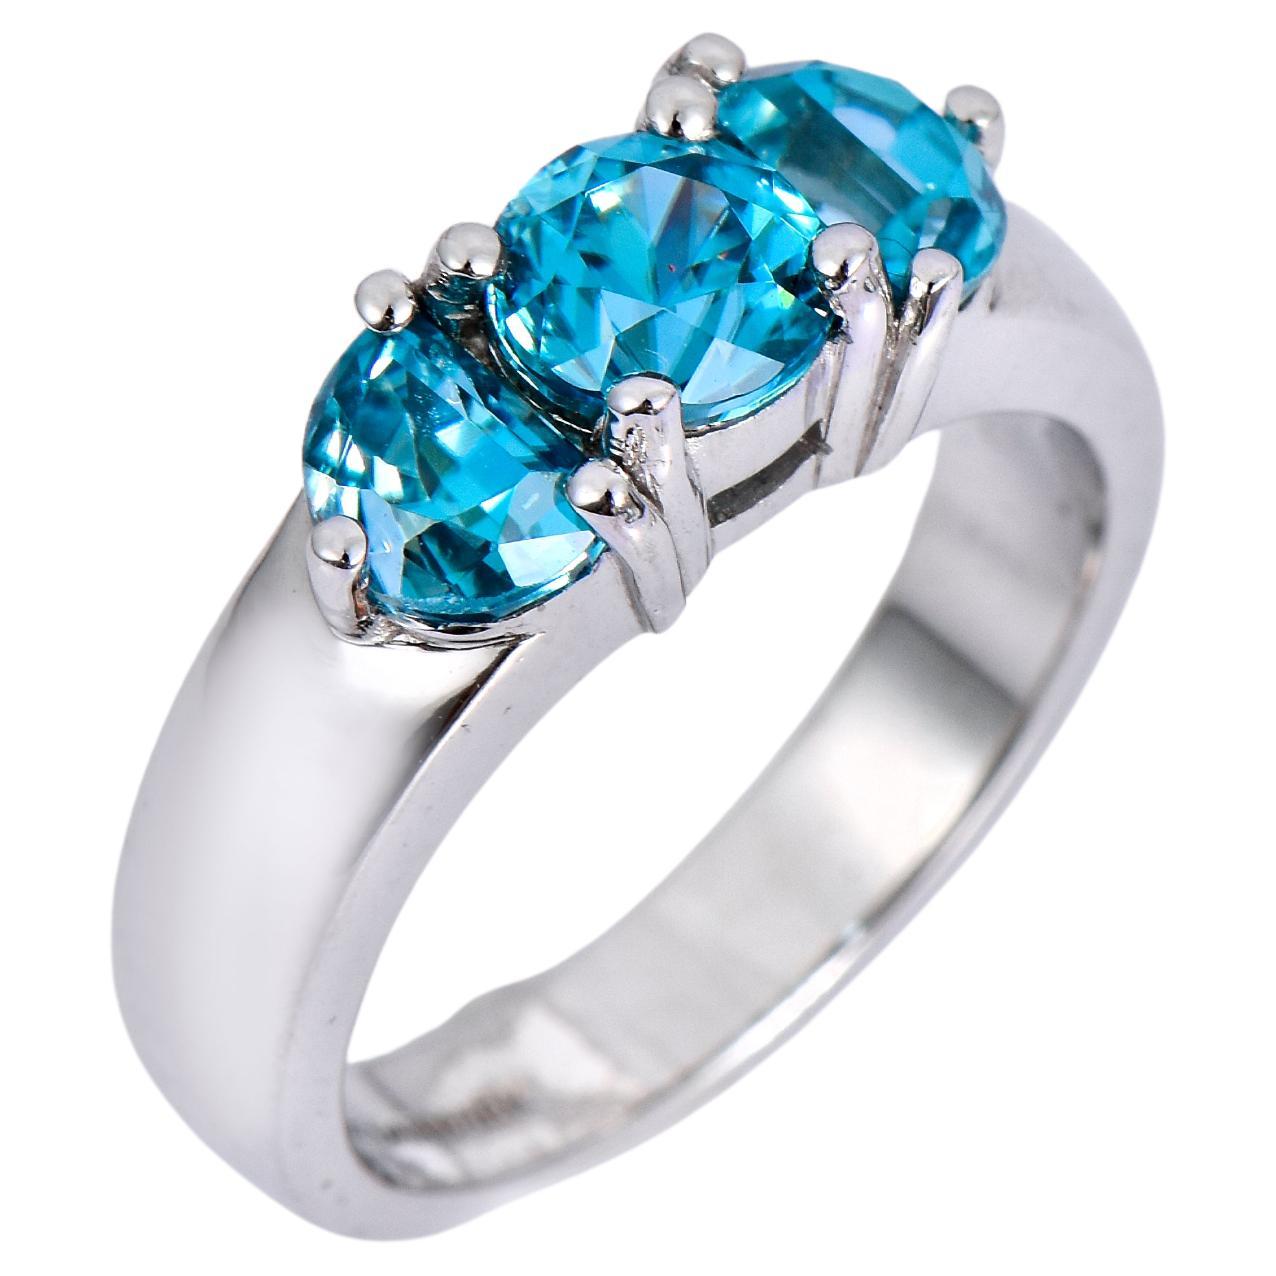 Orloff of Denmark, 3.41 ct Natural Blue Zircon Ring in 925 Sterling Silver